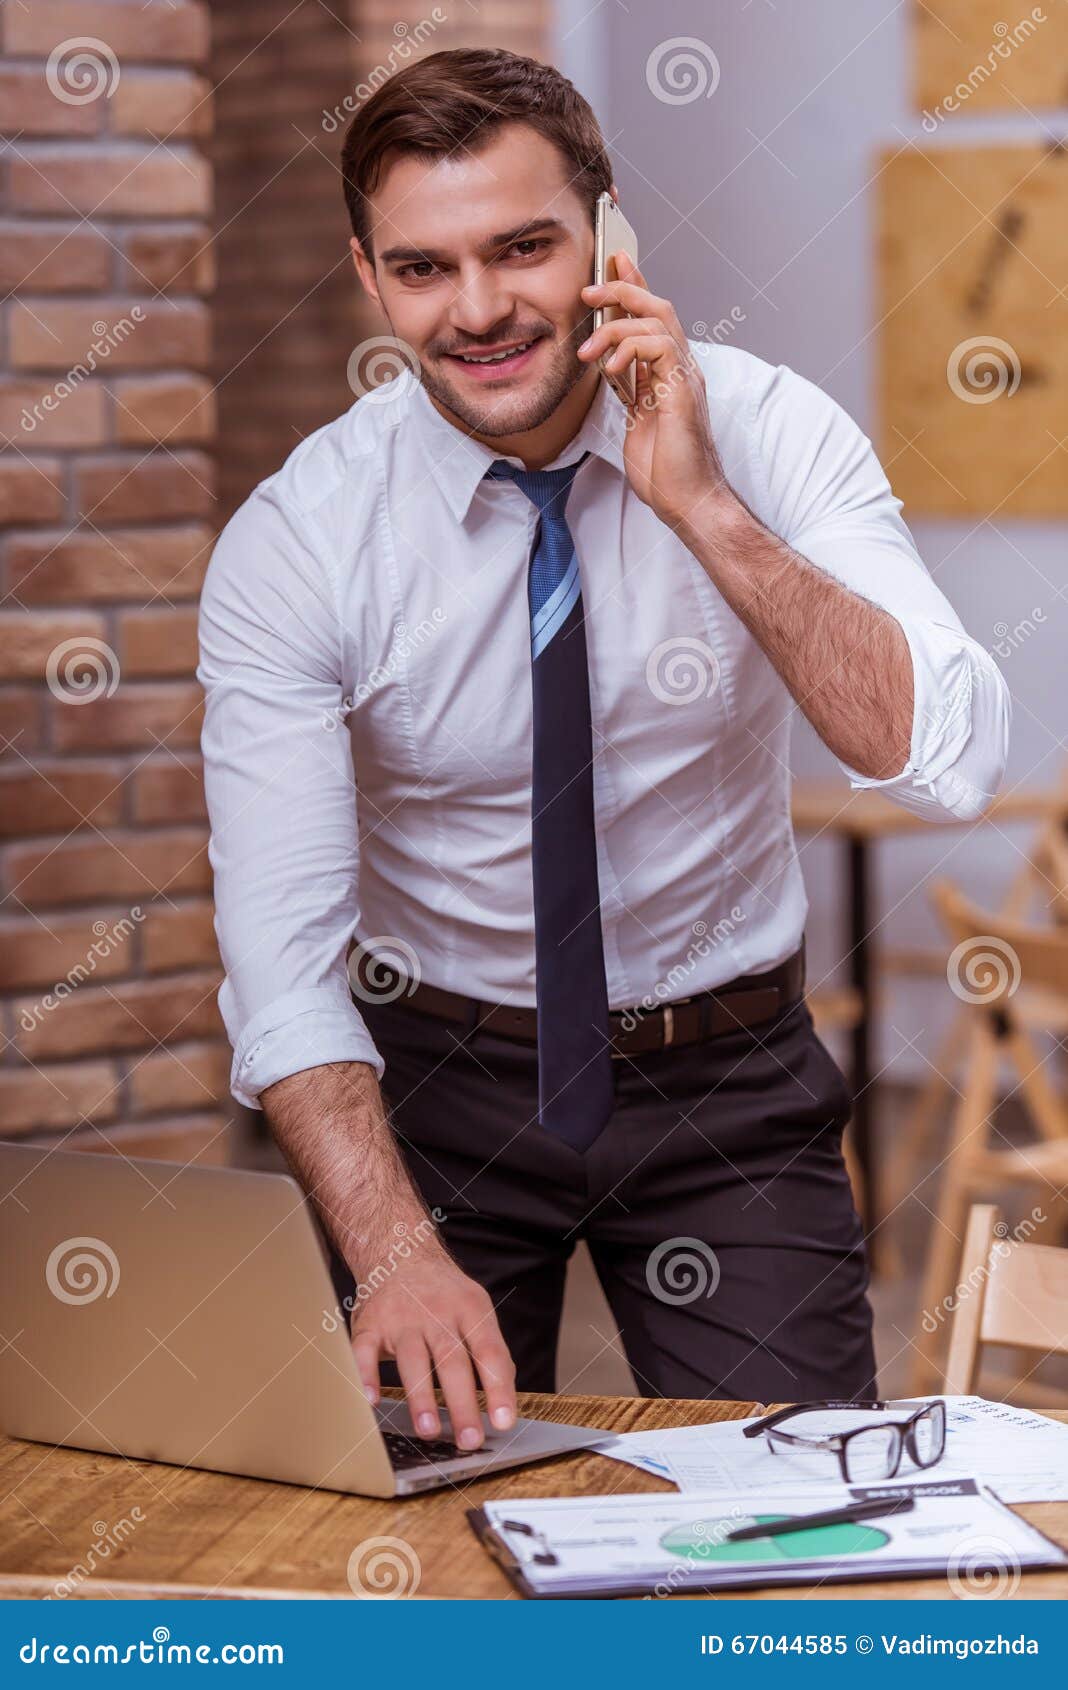 Attractive Businessman Working Stock Image Image Of Brunet Cheerful